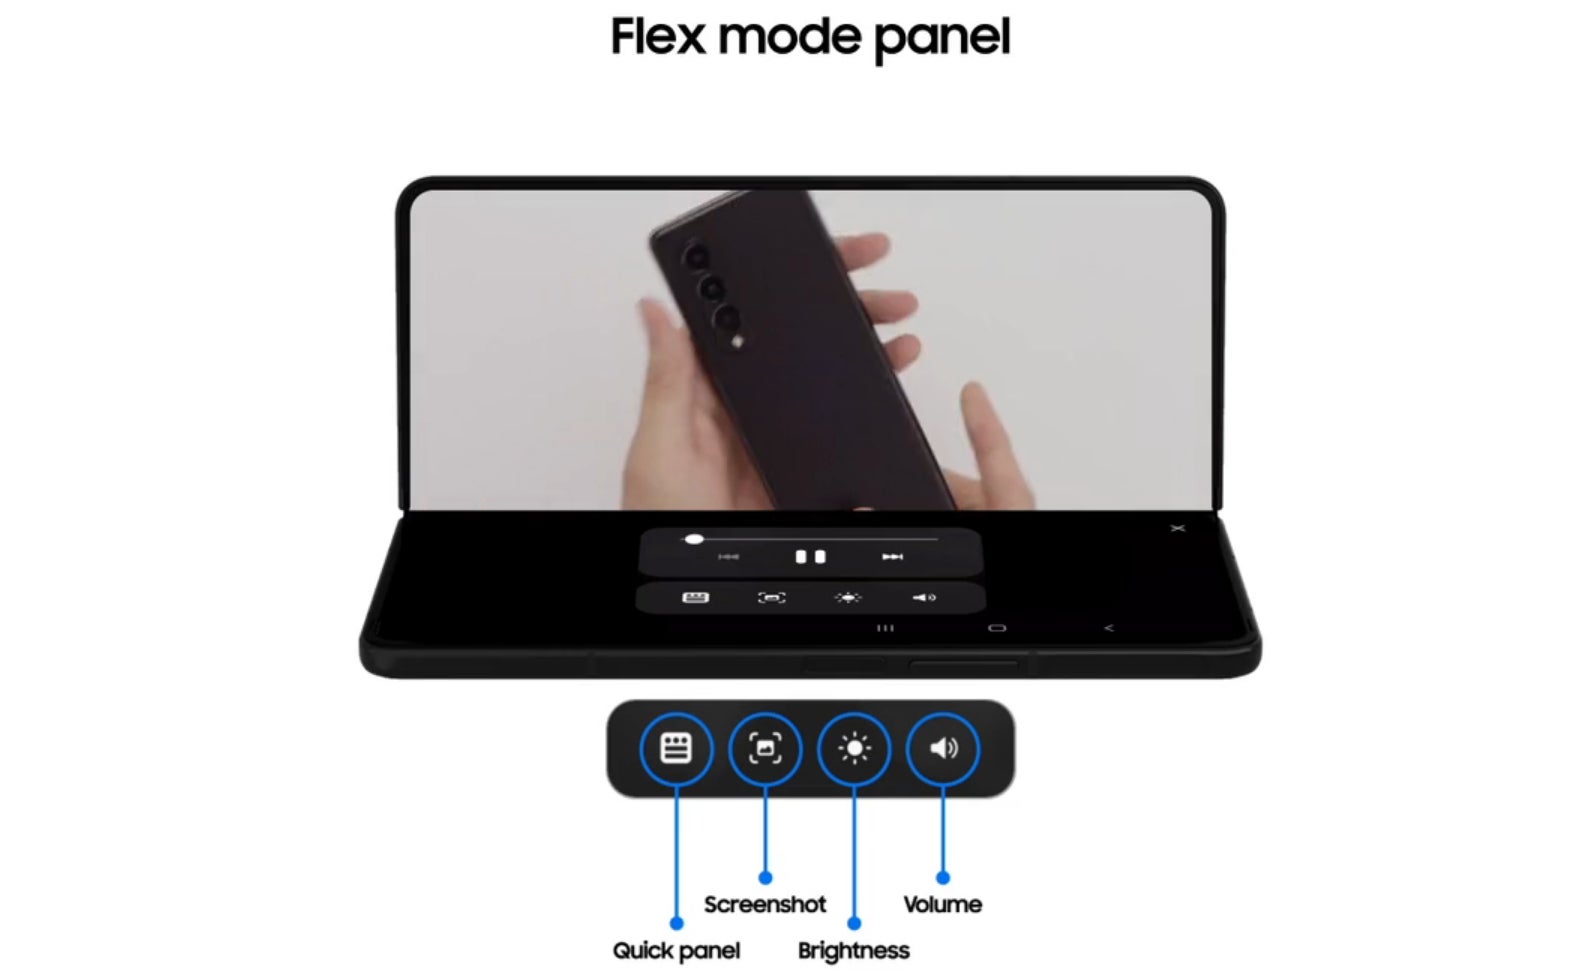 Flex mode panel - Samsung’s new One UI 3.1.1 brings enhanced foldable experiences to Galaxy Z series users